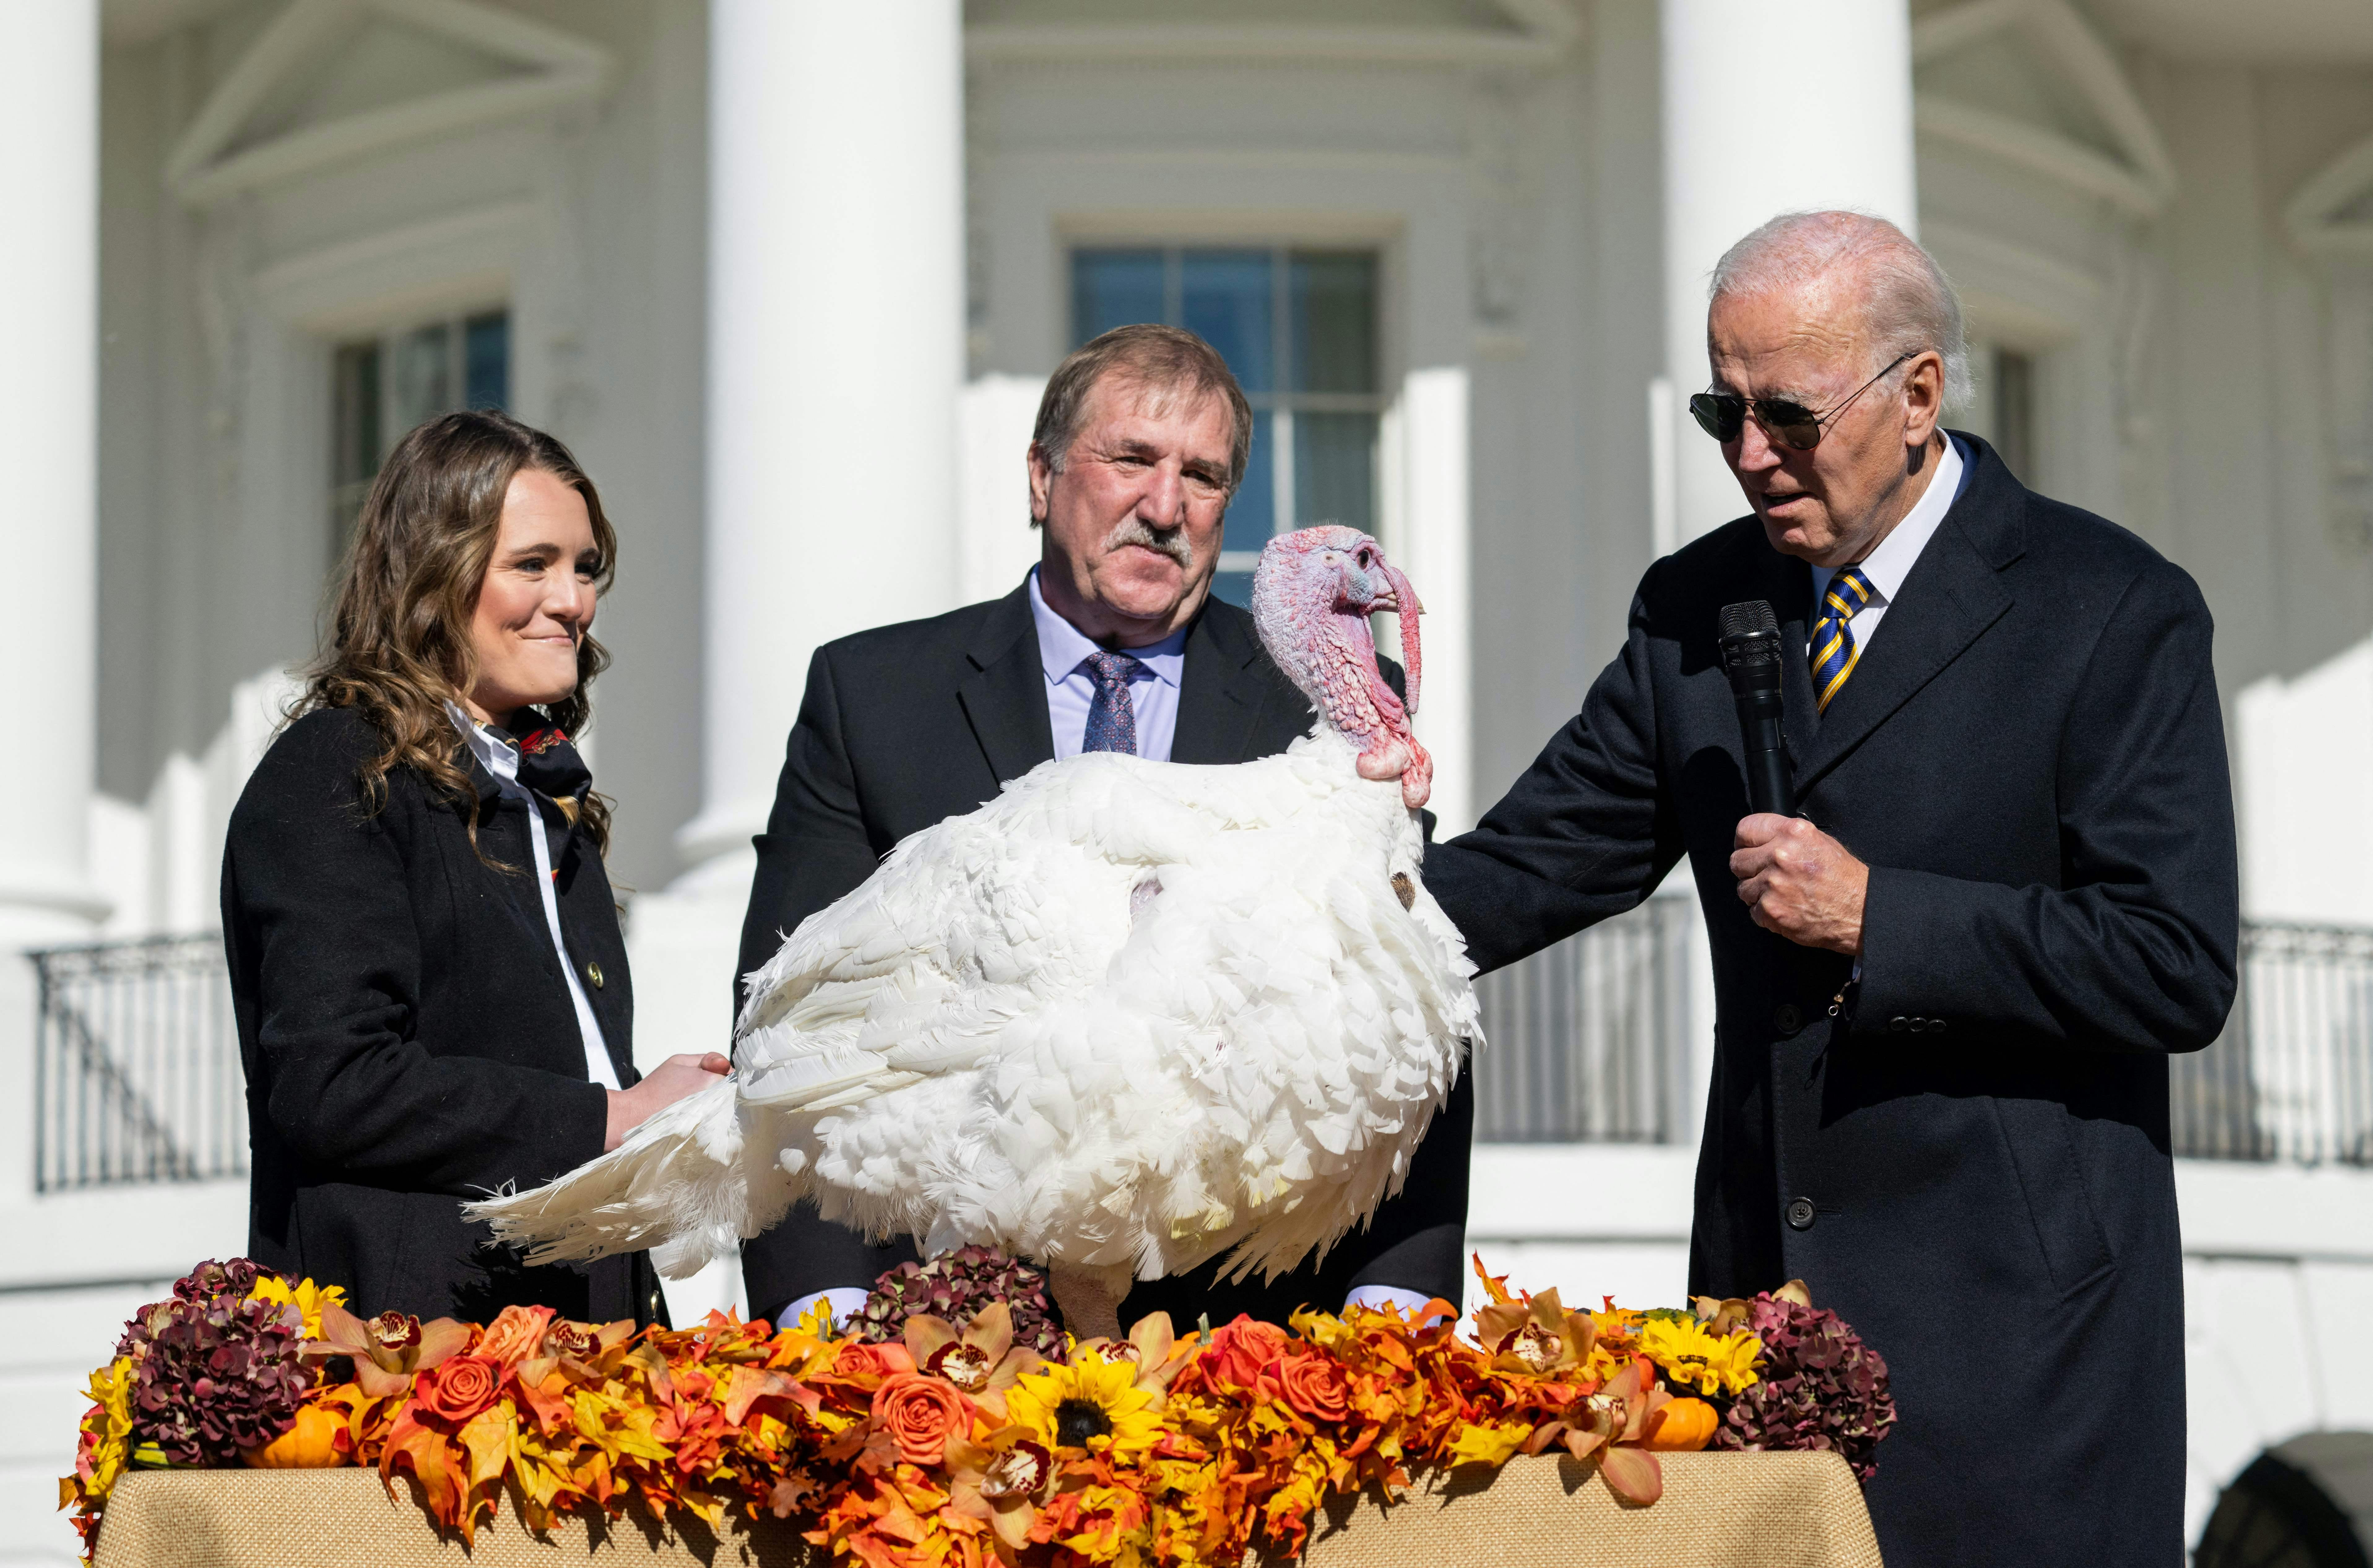 Joe Biden and two others stand behind a turkey positioned on a table festooned with autumn leaves and flowers.